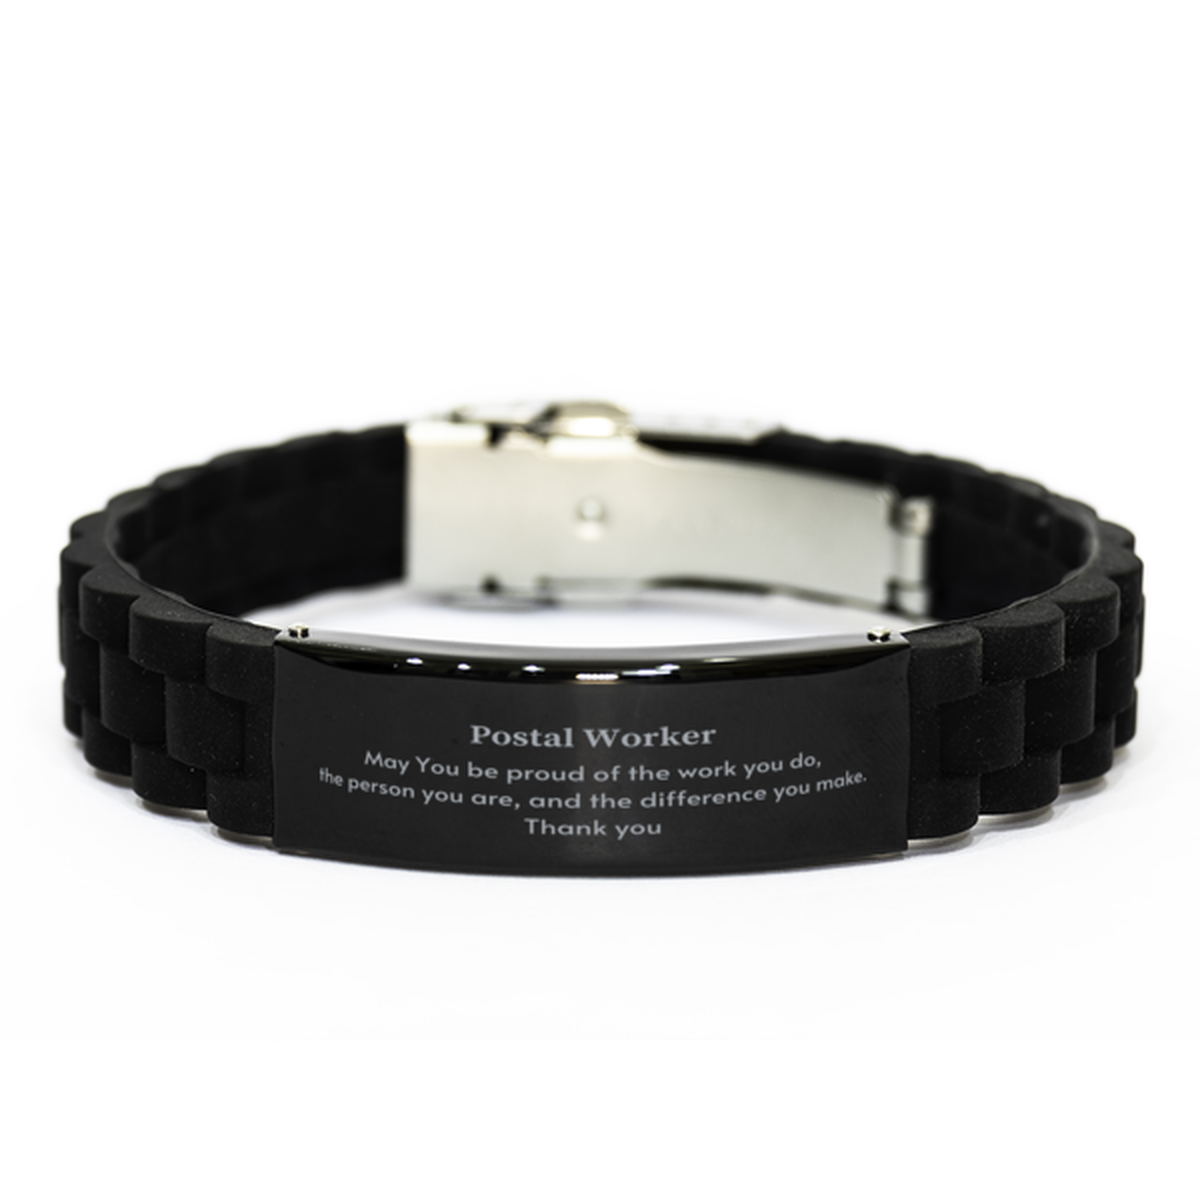 Heartwarming Black Glidelock Clasp Bracelet Retirement Coworkers Gifts for Postal Worker, Postal Worker May You be proud of the work you do, the person you are Gifts for Boss Men Women Friends